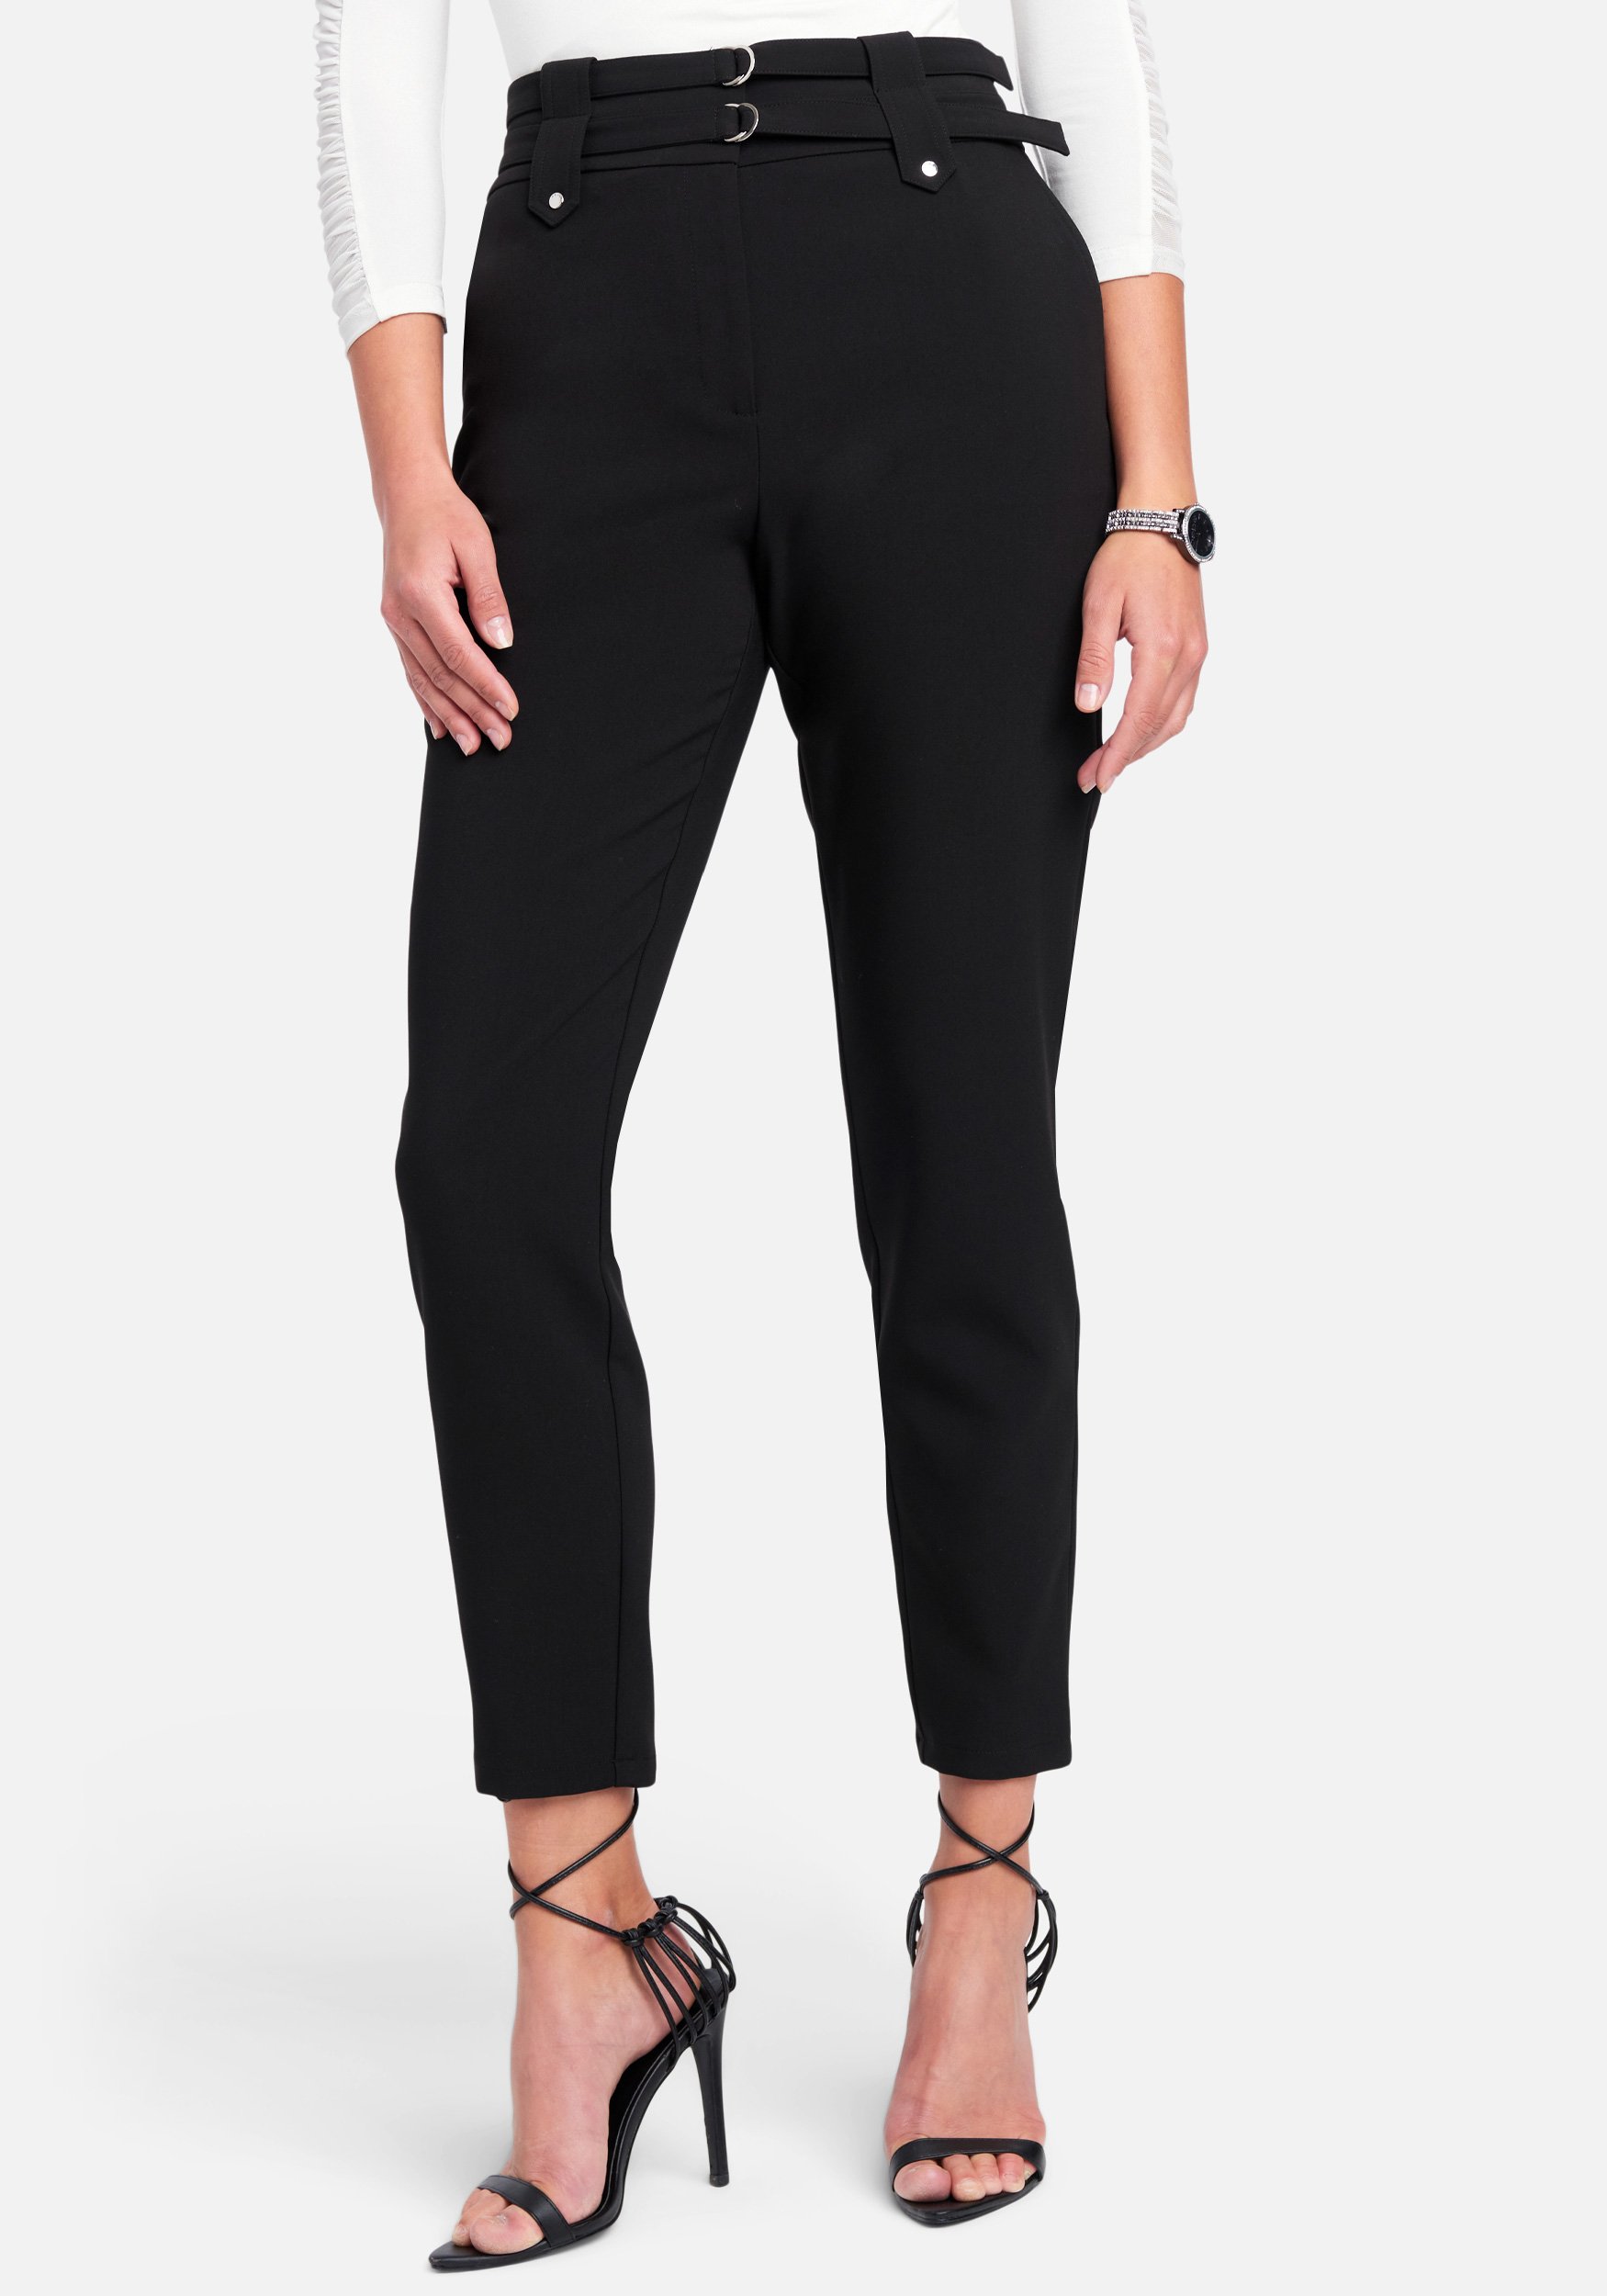 Bebe Women's Double Banded Stretch Twill Pant, Size 8 in Black Spandex/Viscose